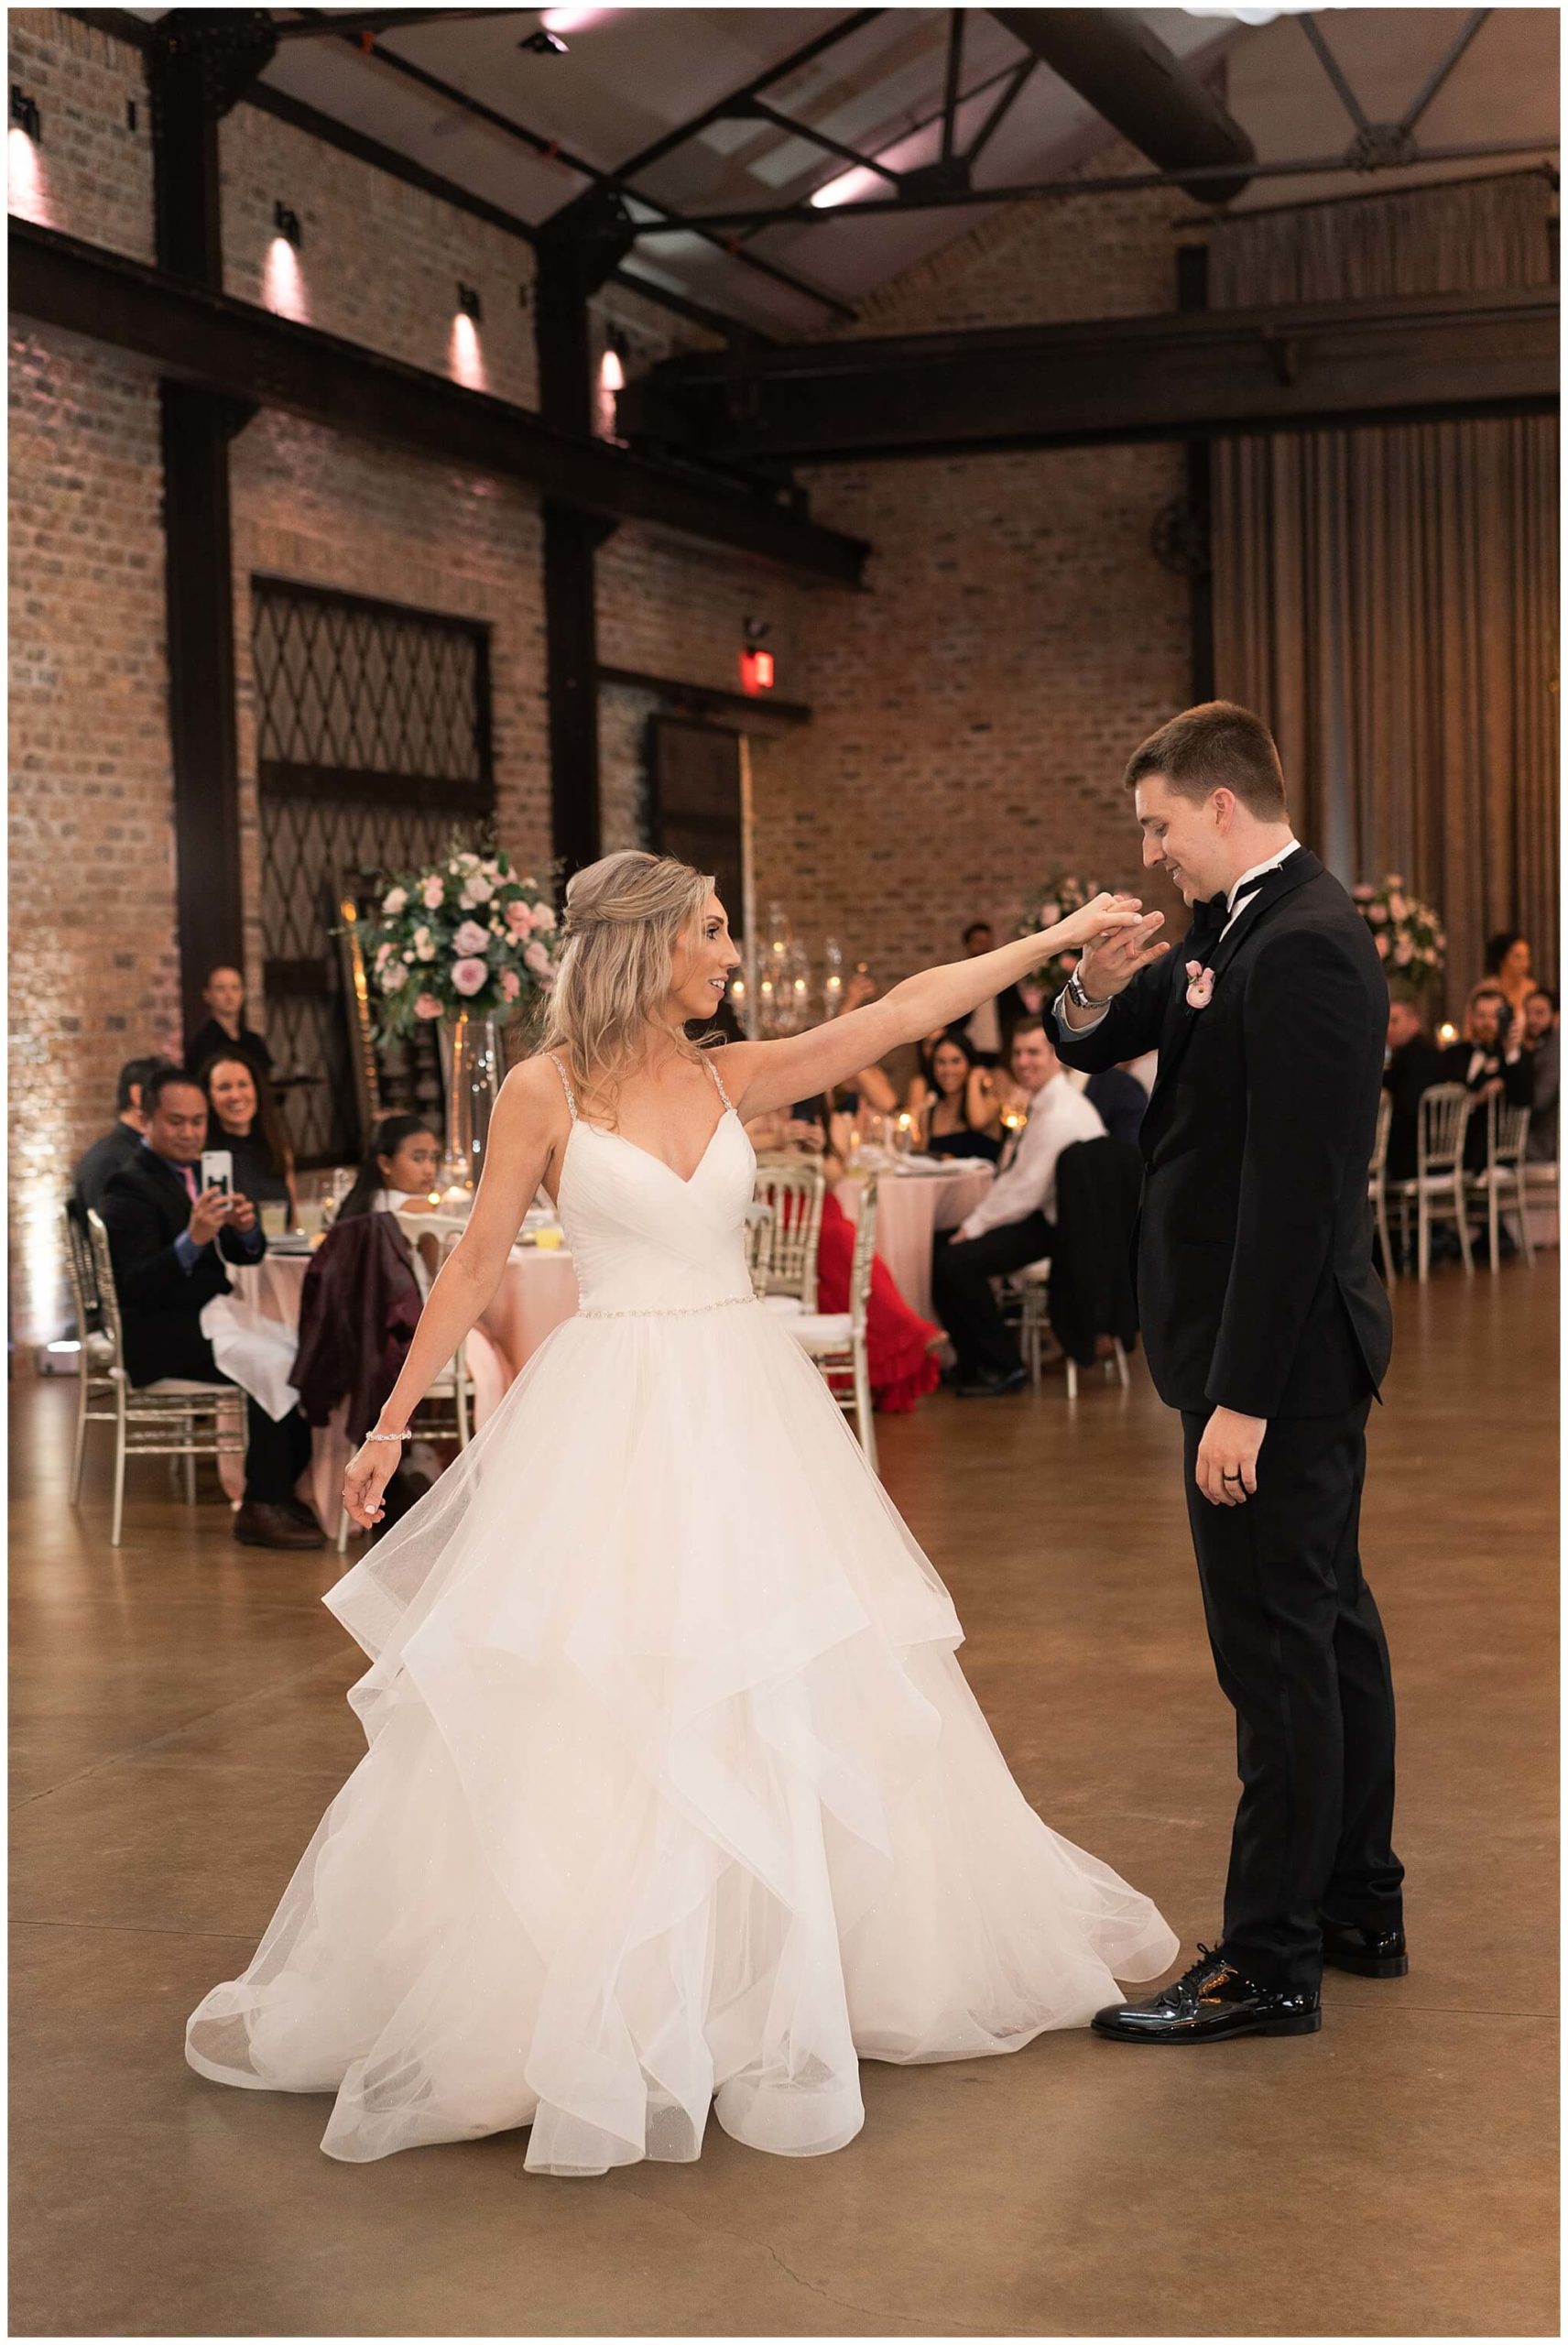 frist dance between bride and groom at Iron Manor in Houston Texas by Swish and Click Photography